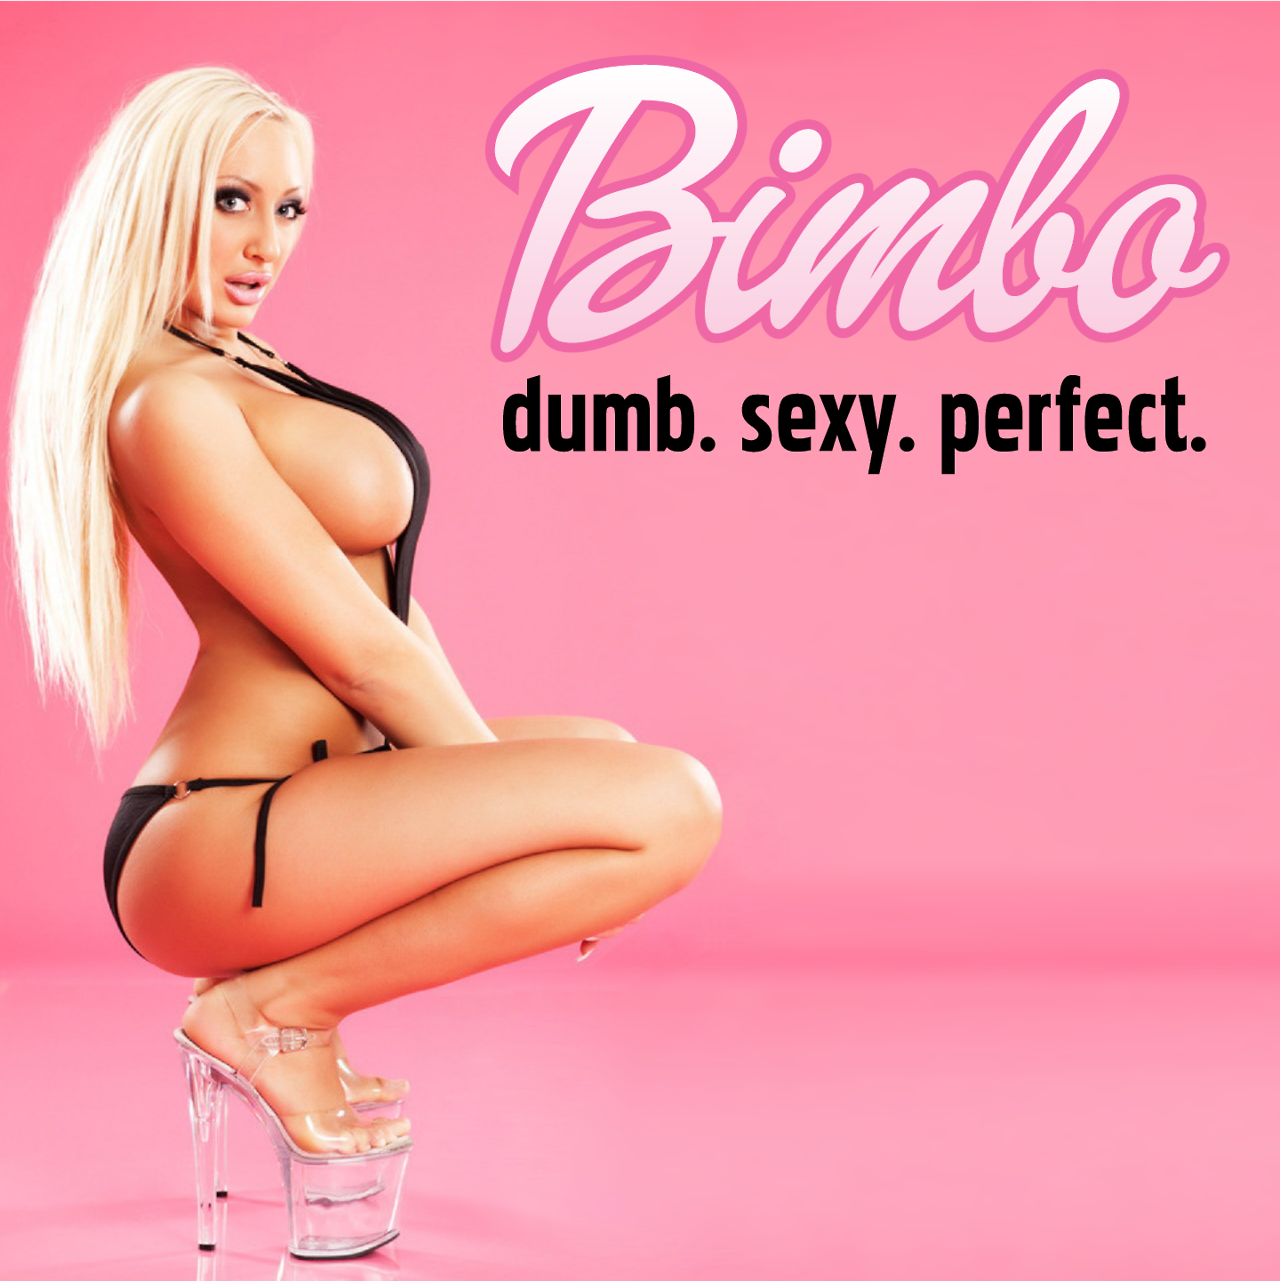 Photo by waynetriskelion with the username @waynetriskelion,  August 4, 2019 at 11:37 PM. The post is about the topic Bimbo and the text says 'More bimbo shots from Tumblr. #Bimbo #TumblrRefugees'